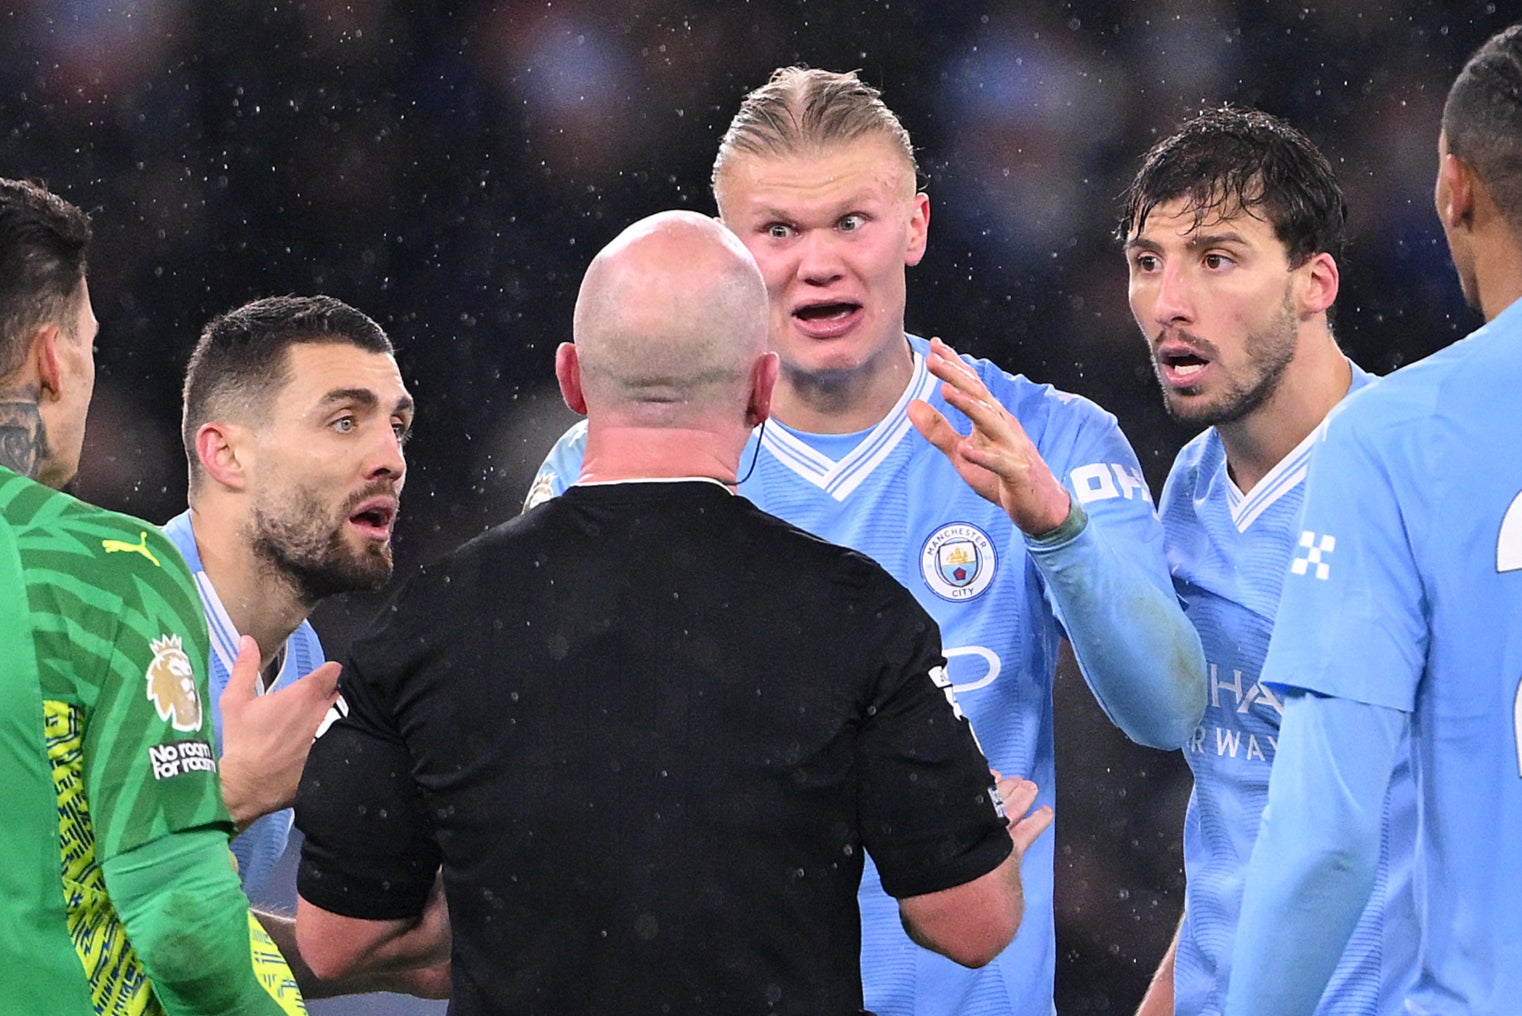 Erling Haaland has words with referee Simon Hooper during the Premier League match between Manchester City and Tottenham Hotspur on 3 December